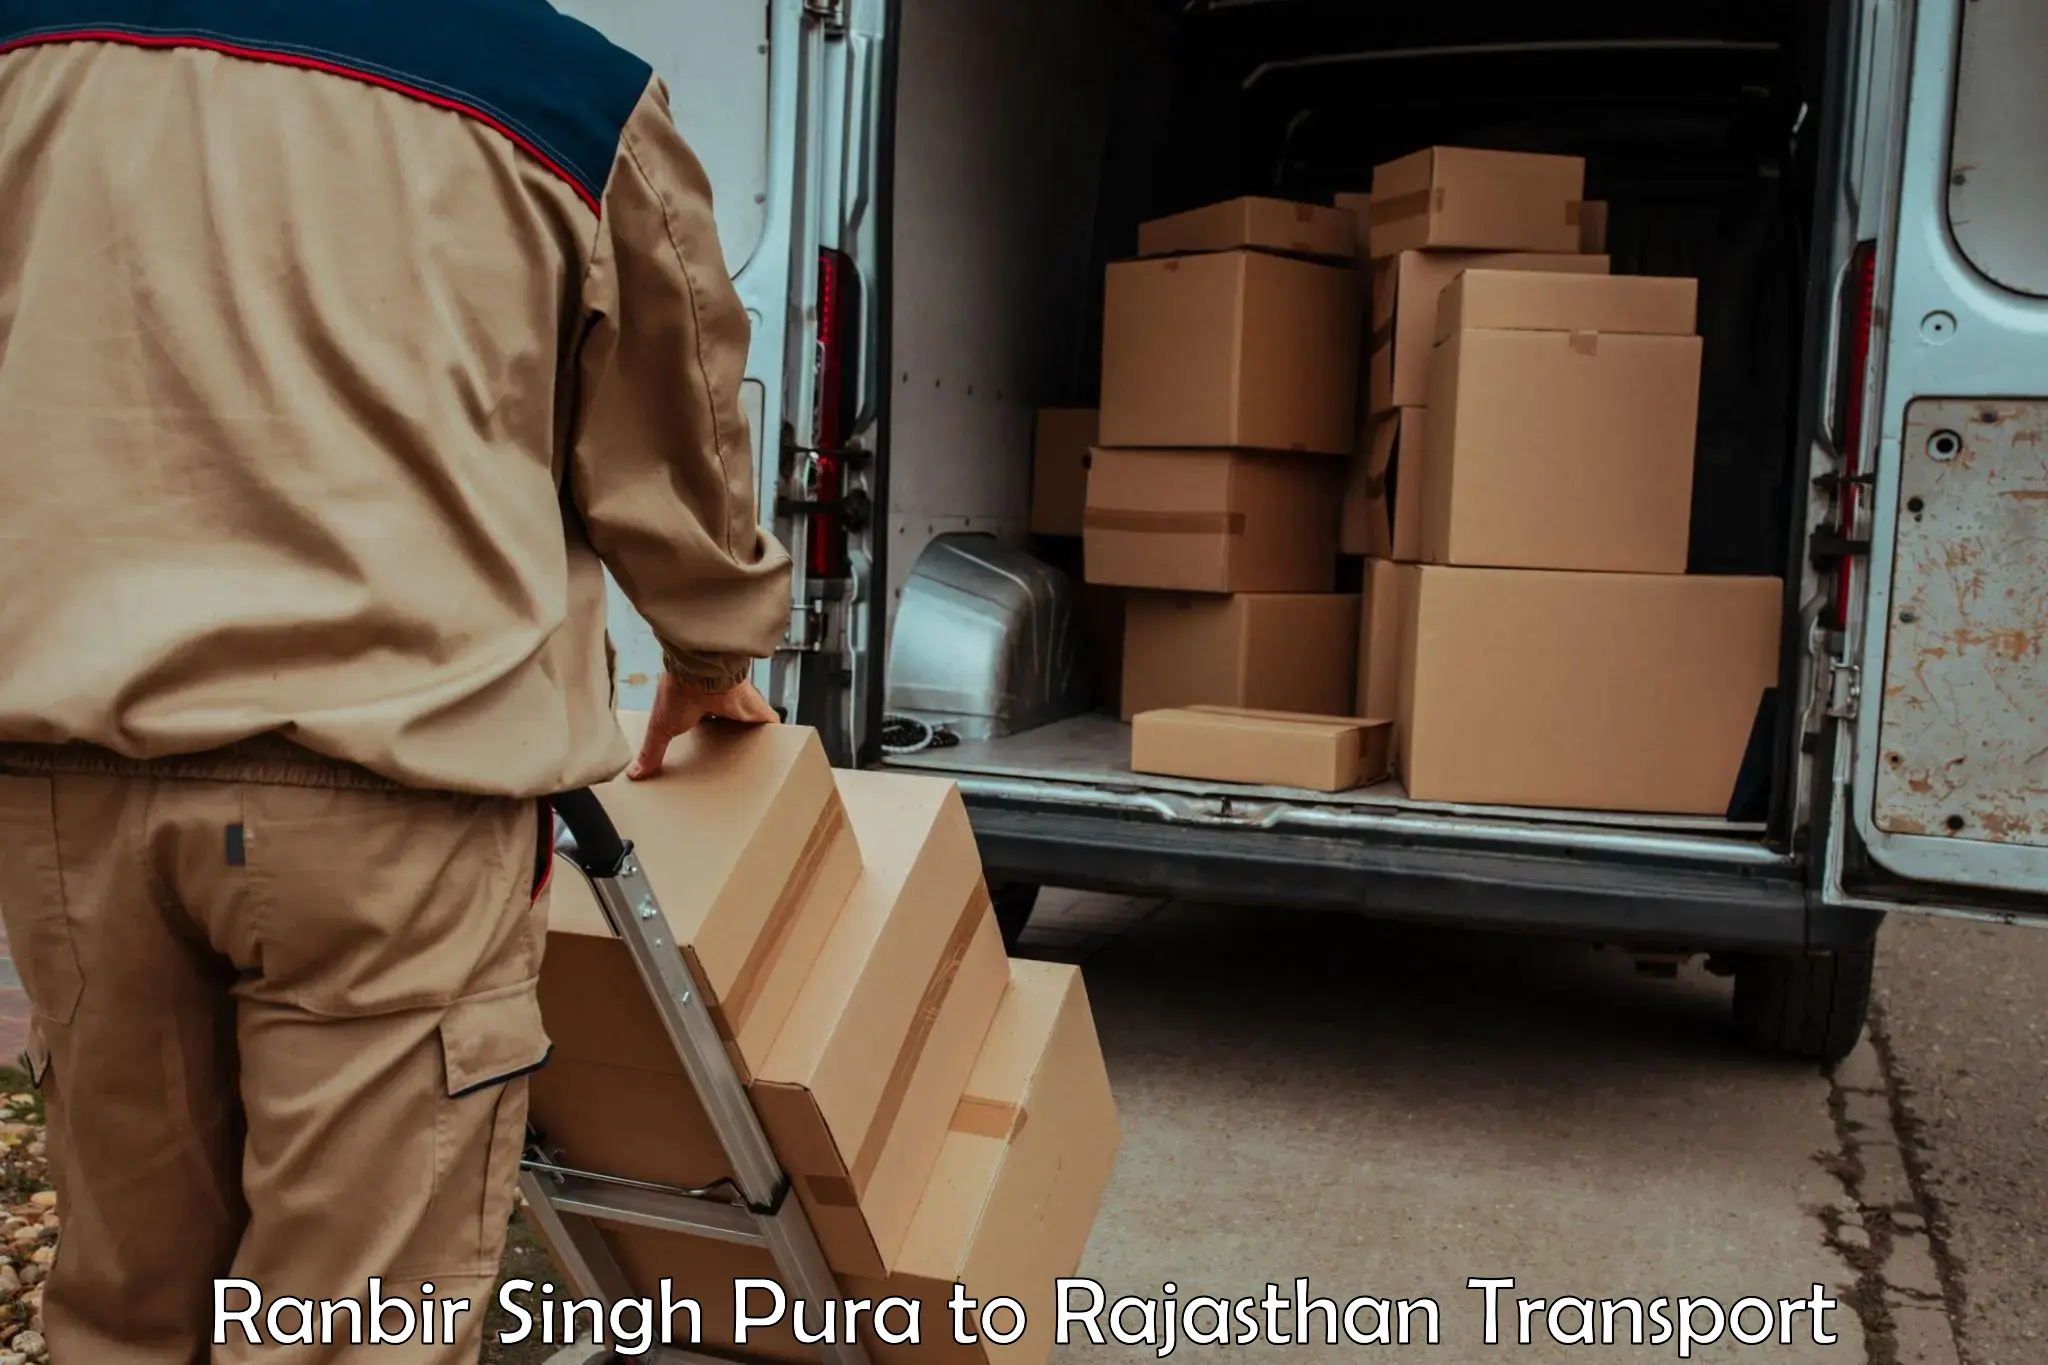 Transport bike from one state to another Ranbir Singh Pura to Fatehpur Sikar